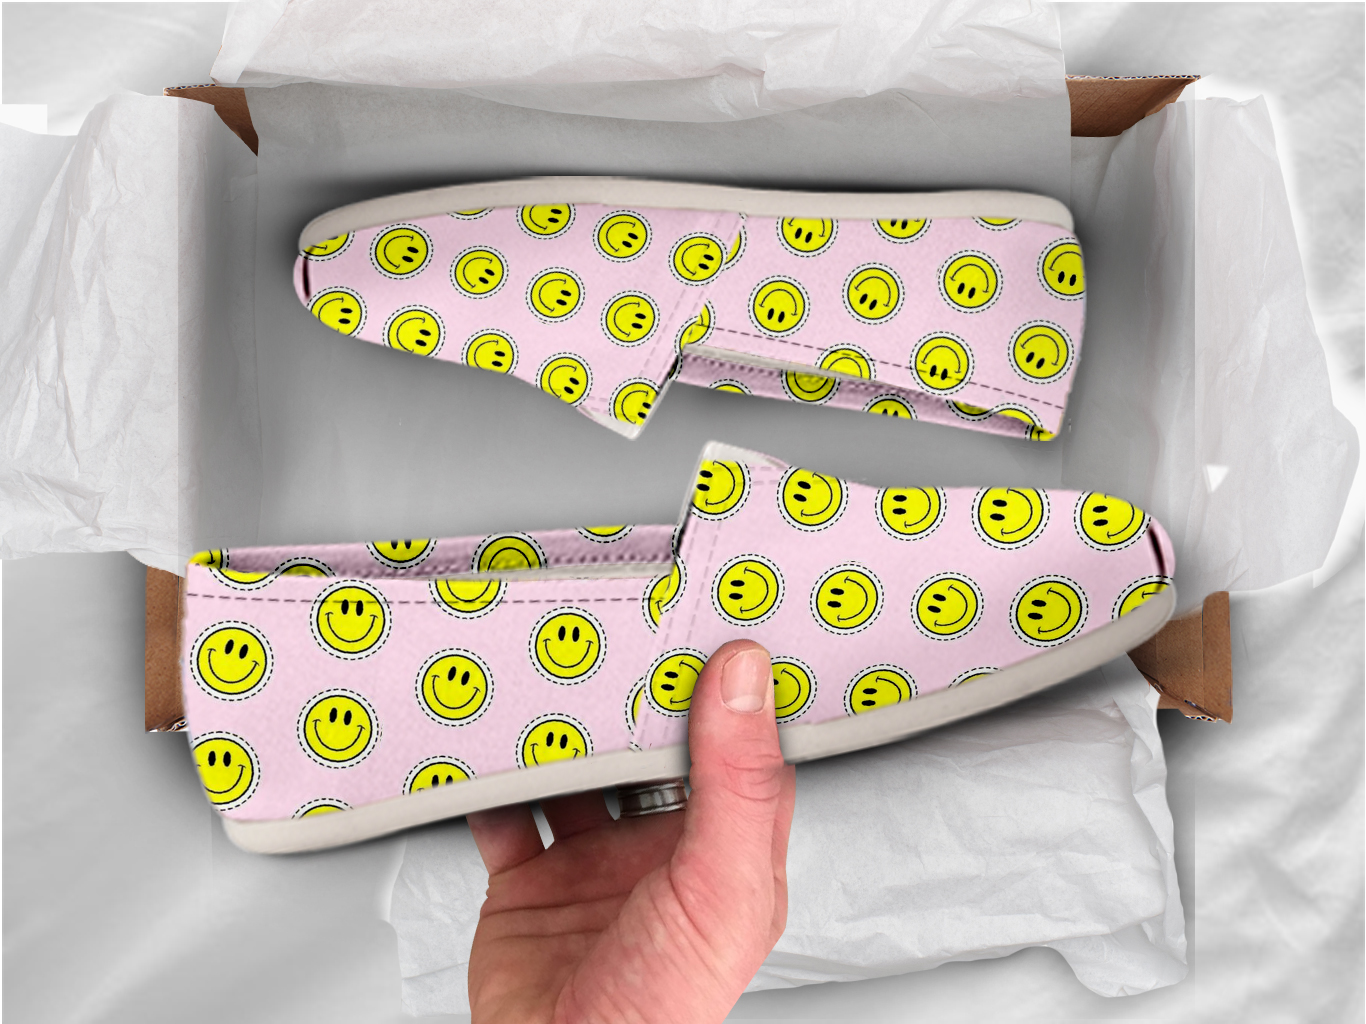 smiley-face-shoes-1